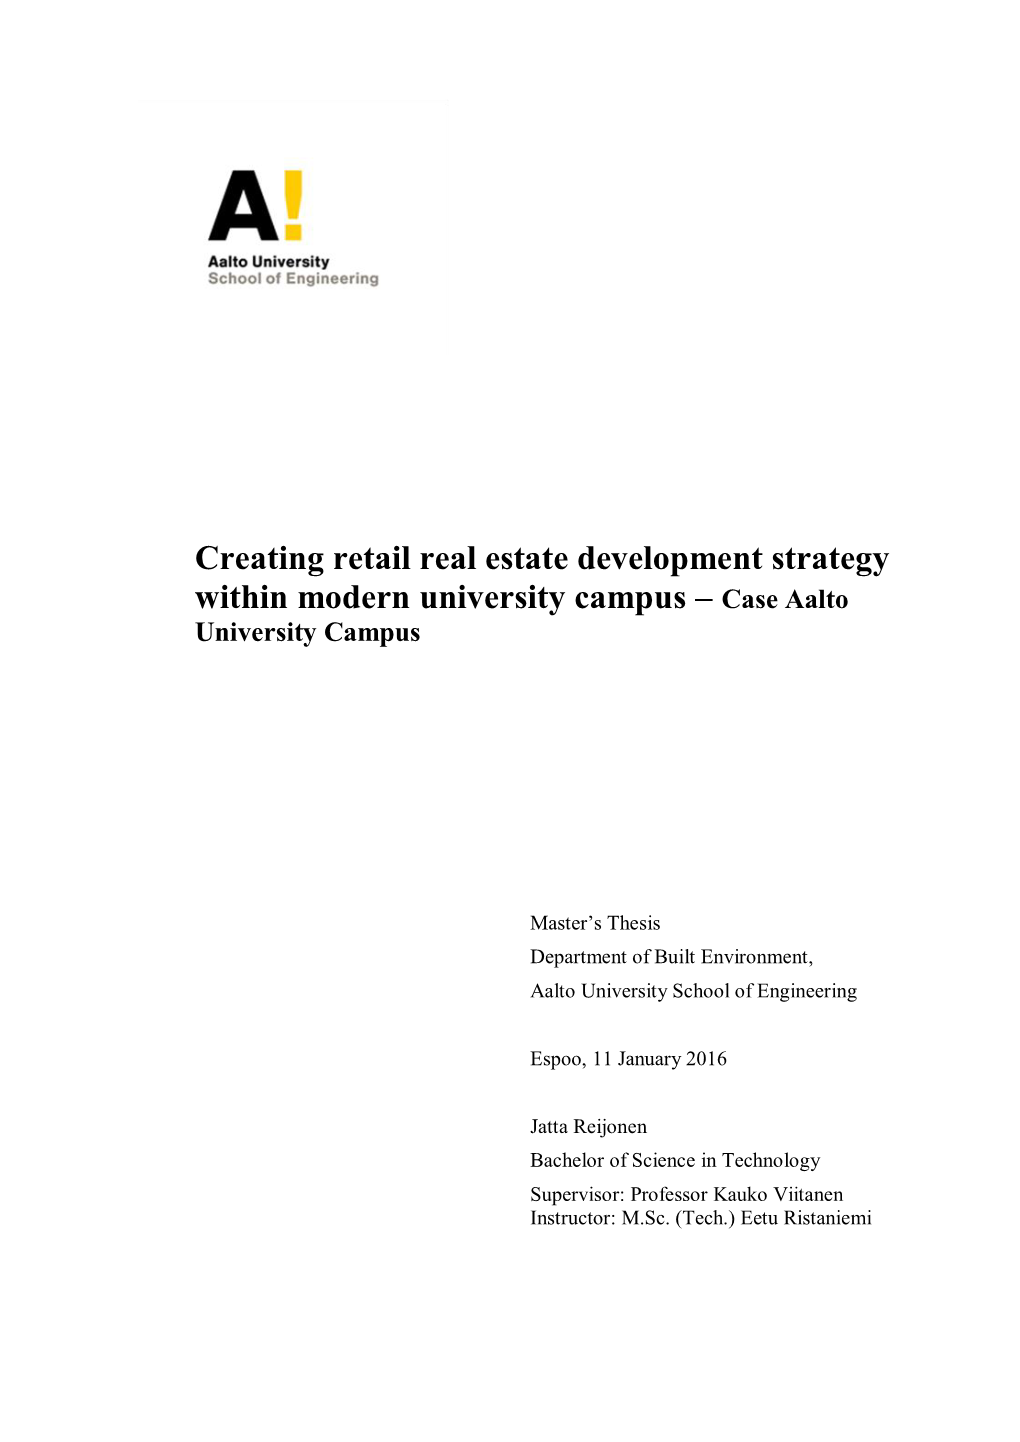 Creating Retail Real Estate Development Strategy Within Modern University Campus – Case Aalto University Campus